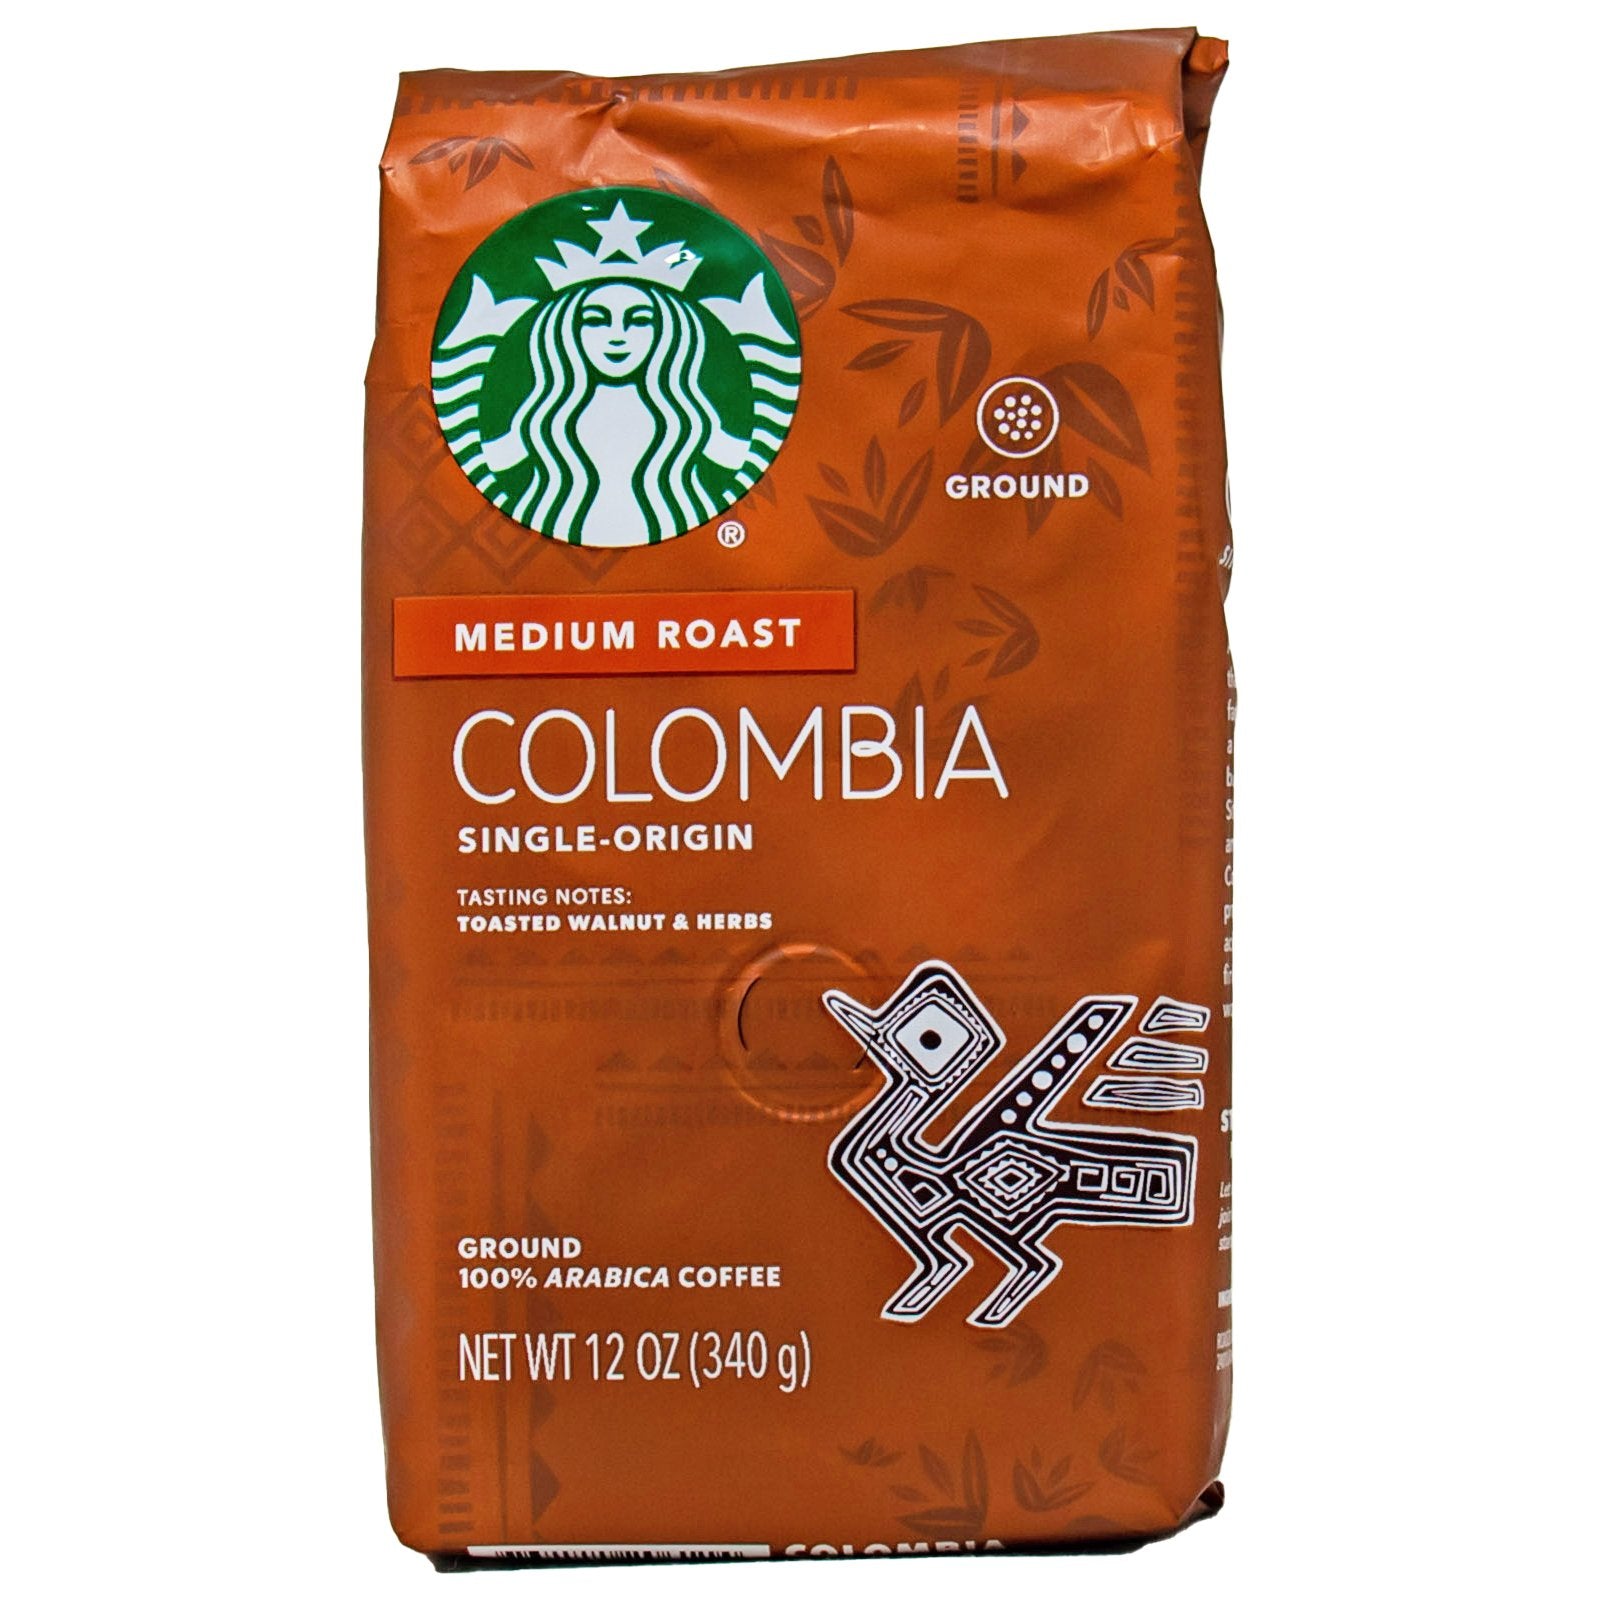 Starbucks Butter Together 2023 Cold Cup 16 oz. Thailand